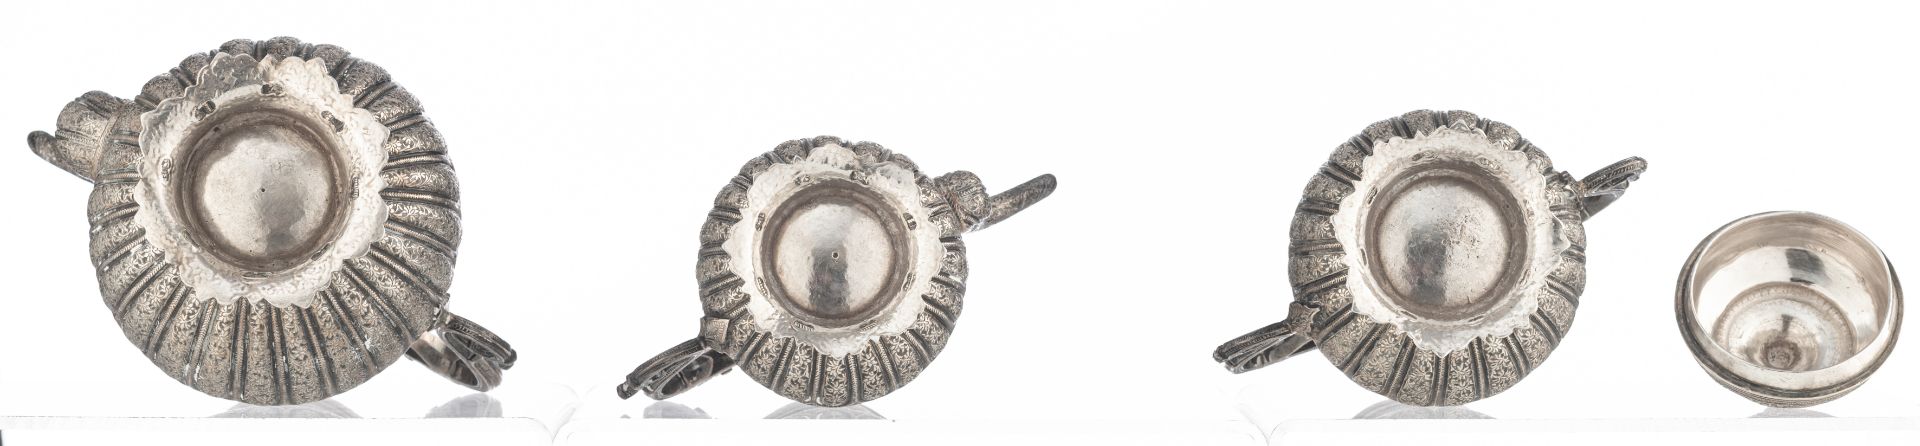 A Persian inspired horror vacui decorated tea set, no visible hallmarks but tested on silver purity, - Image 7 of 10